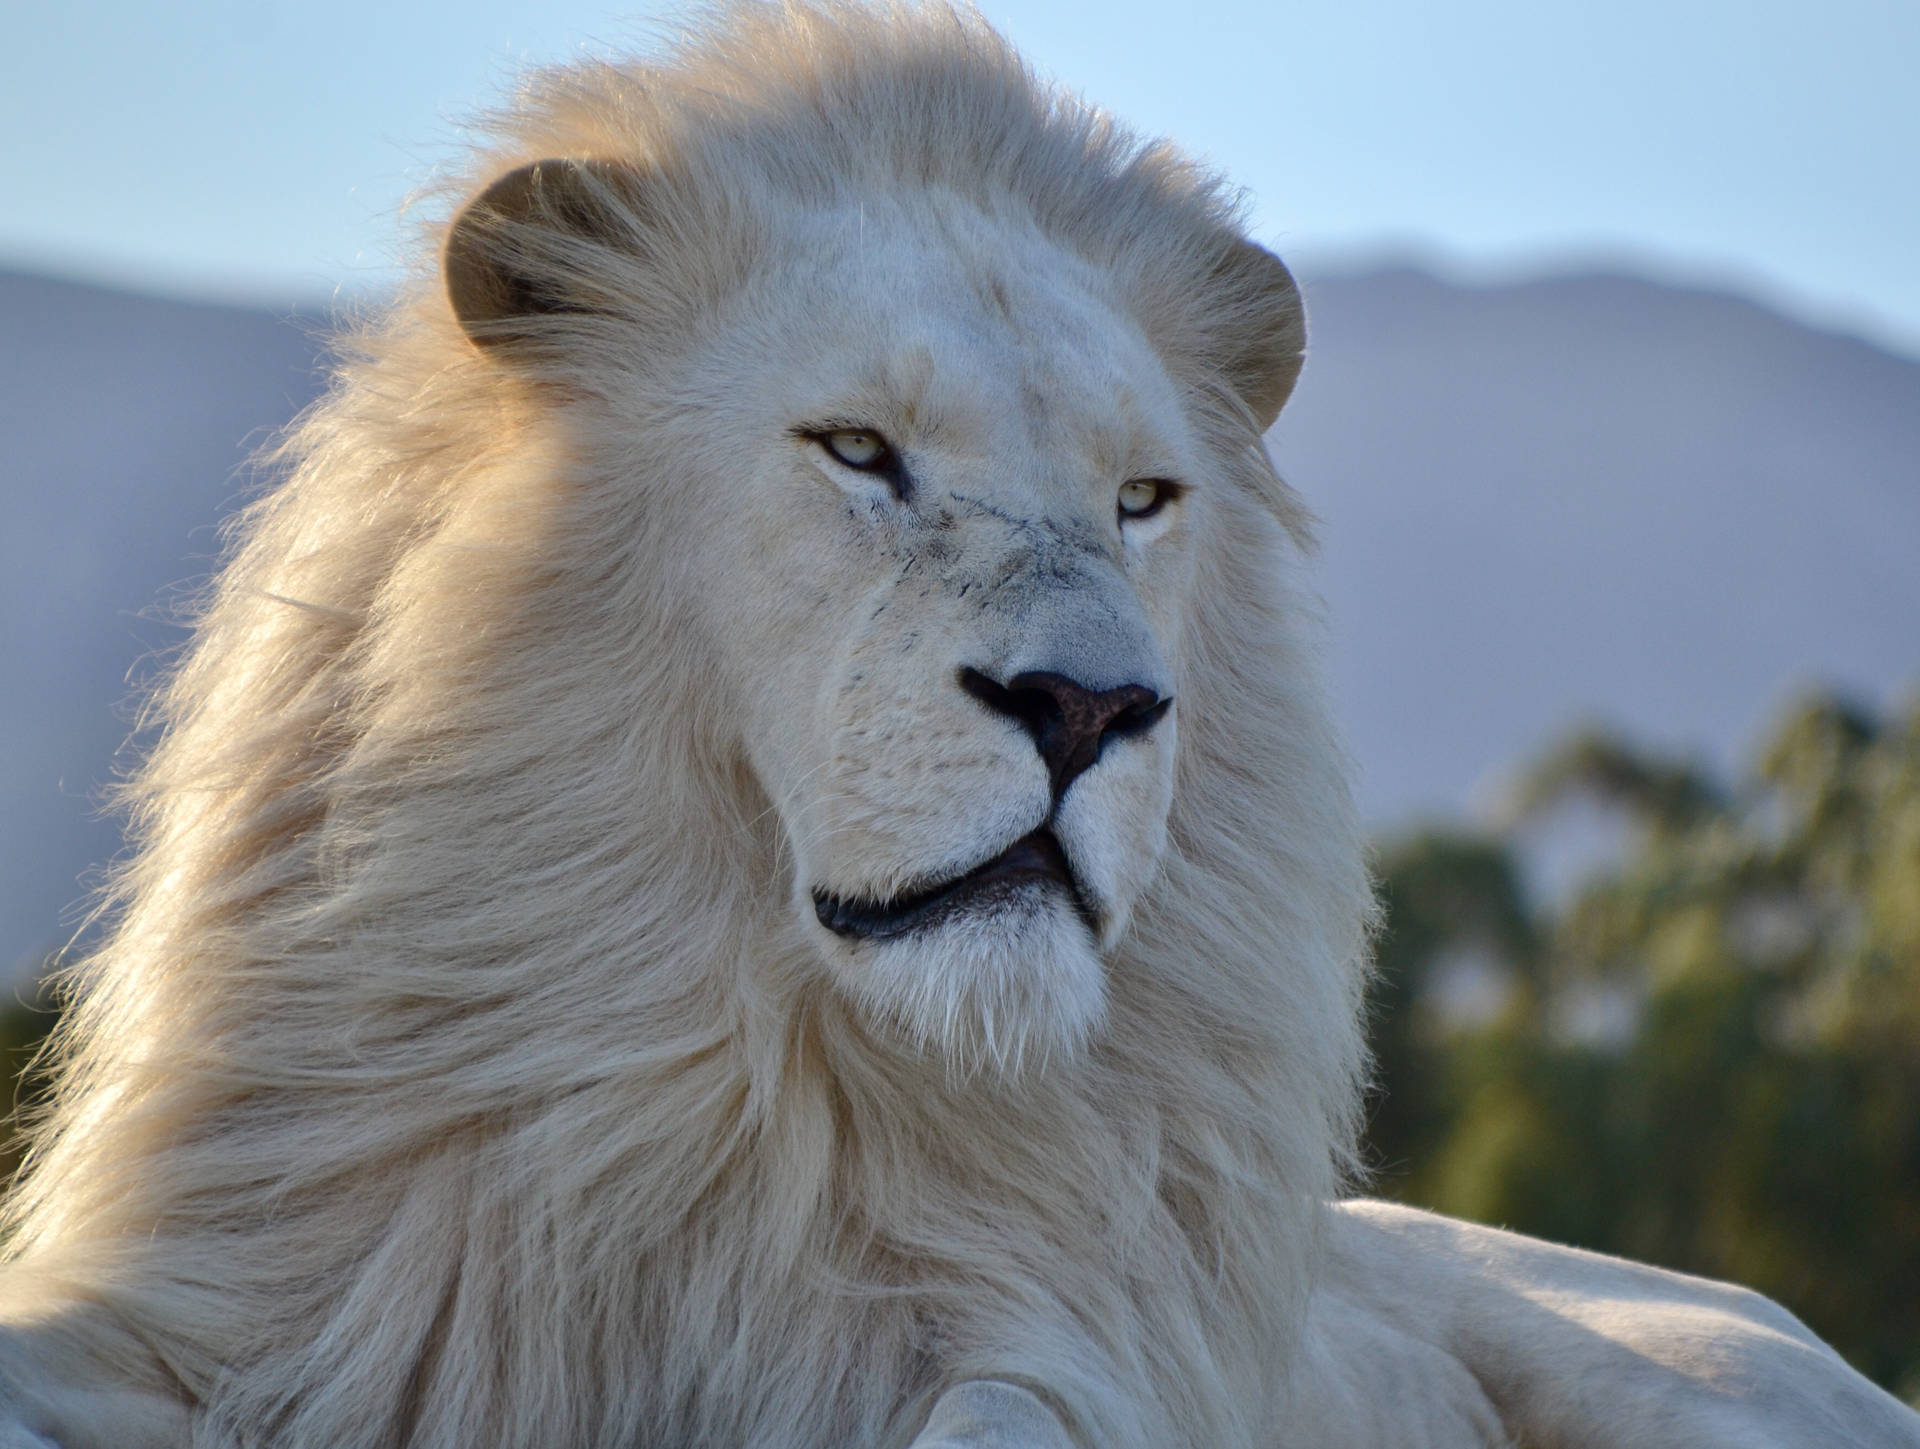 Free White Lion Wallpaper Downloads, [100+] White Lion Wallpapers for FREE  